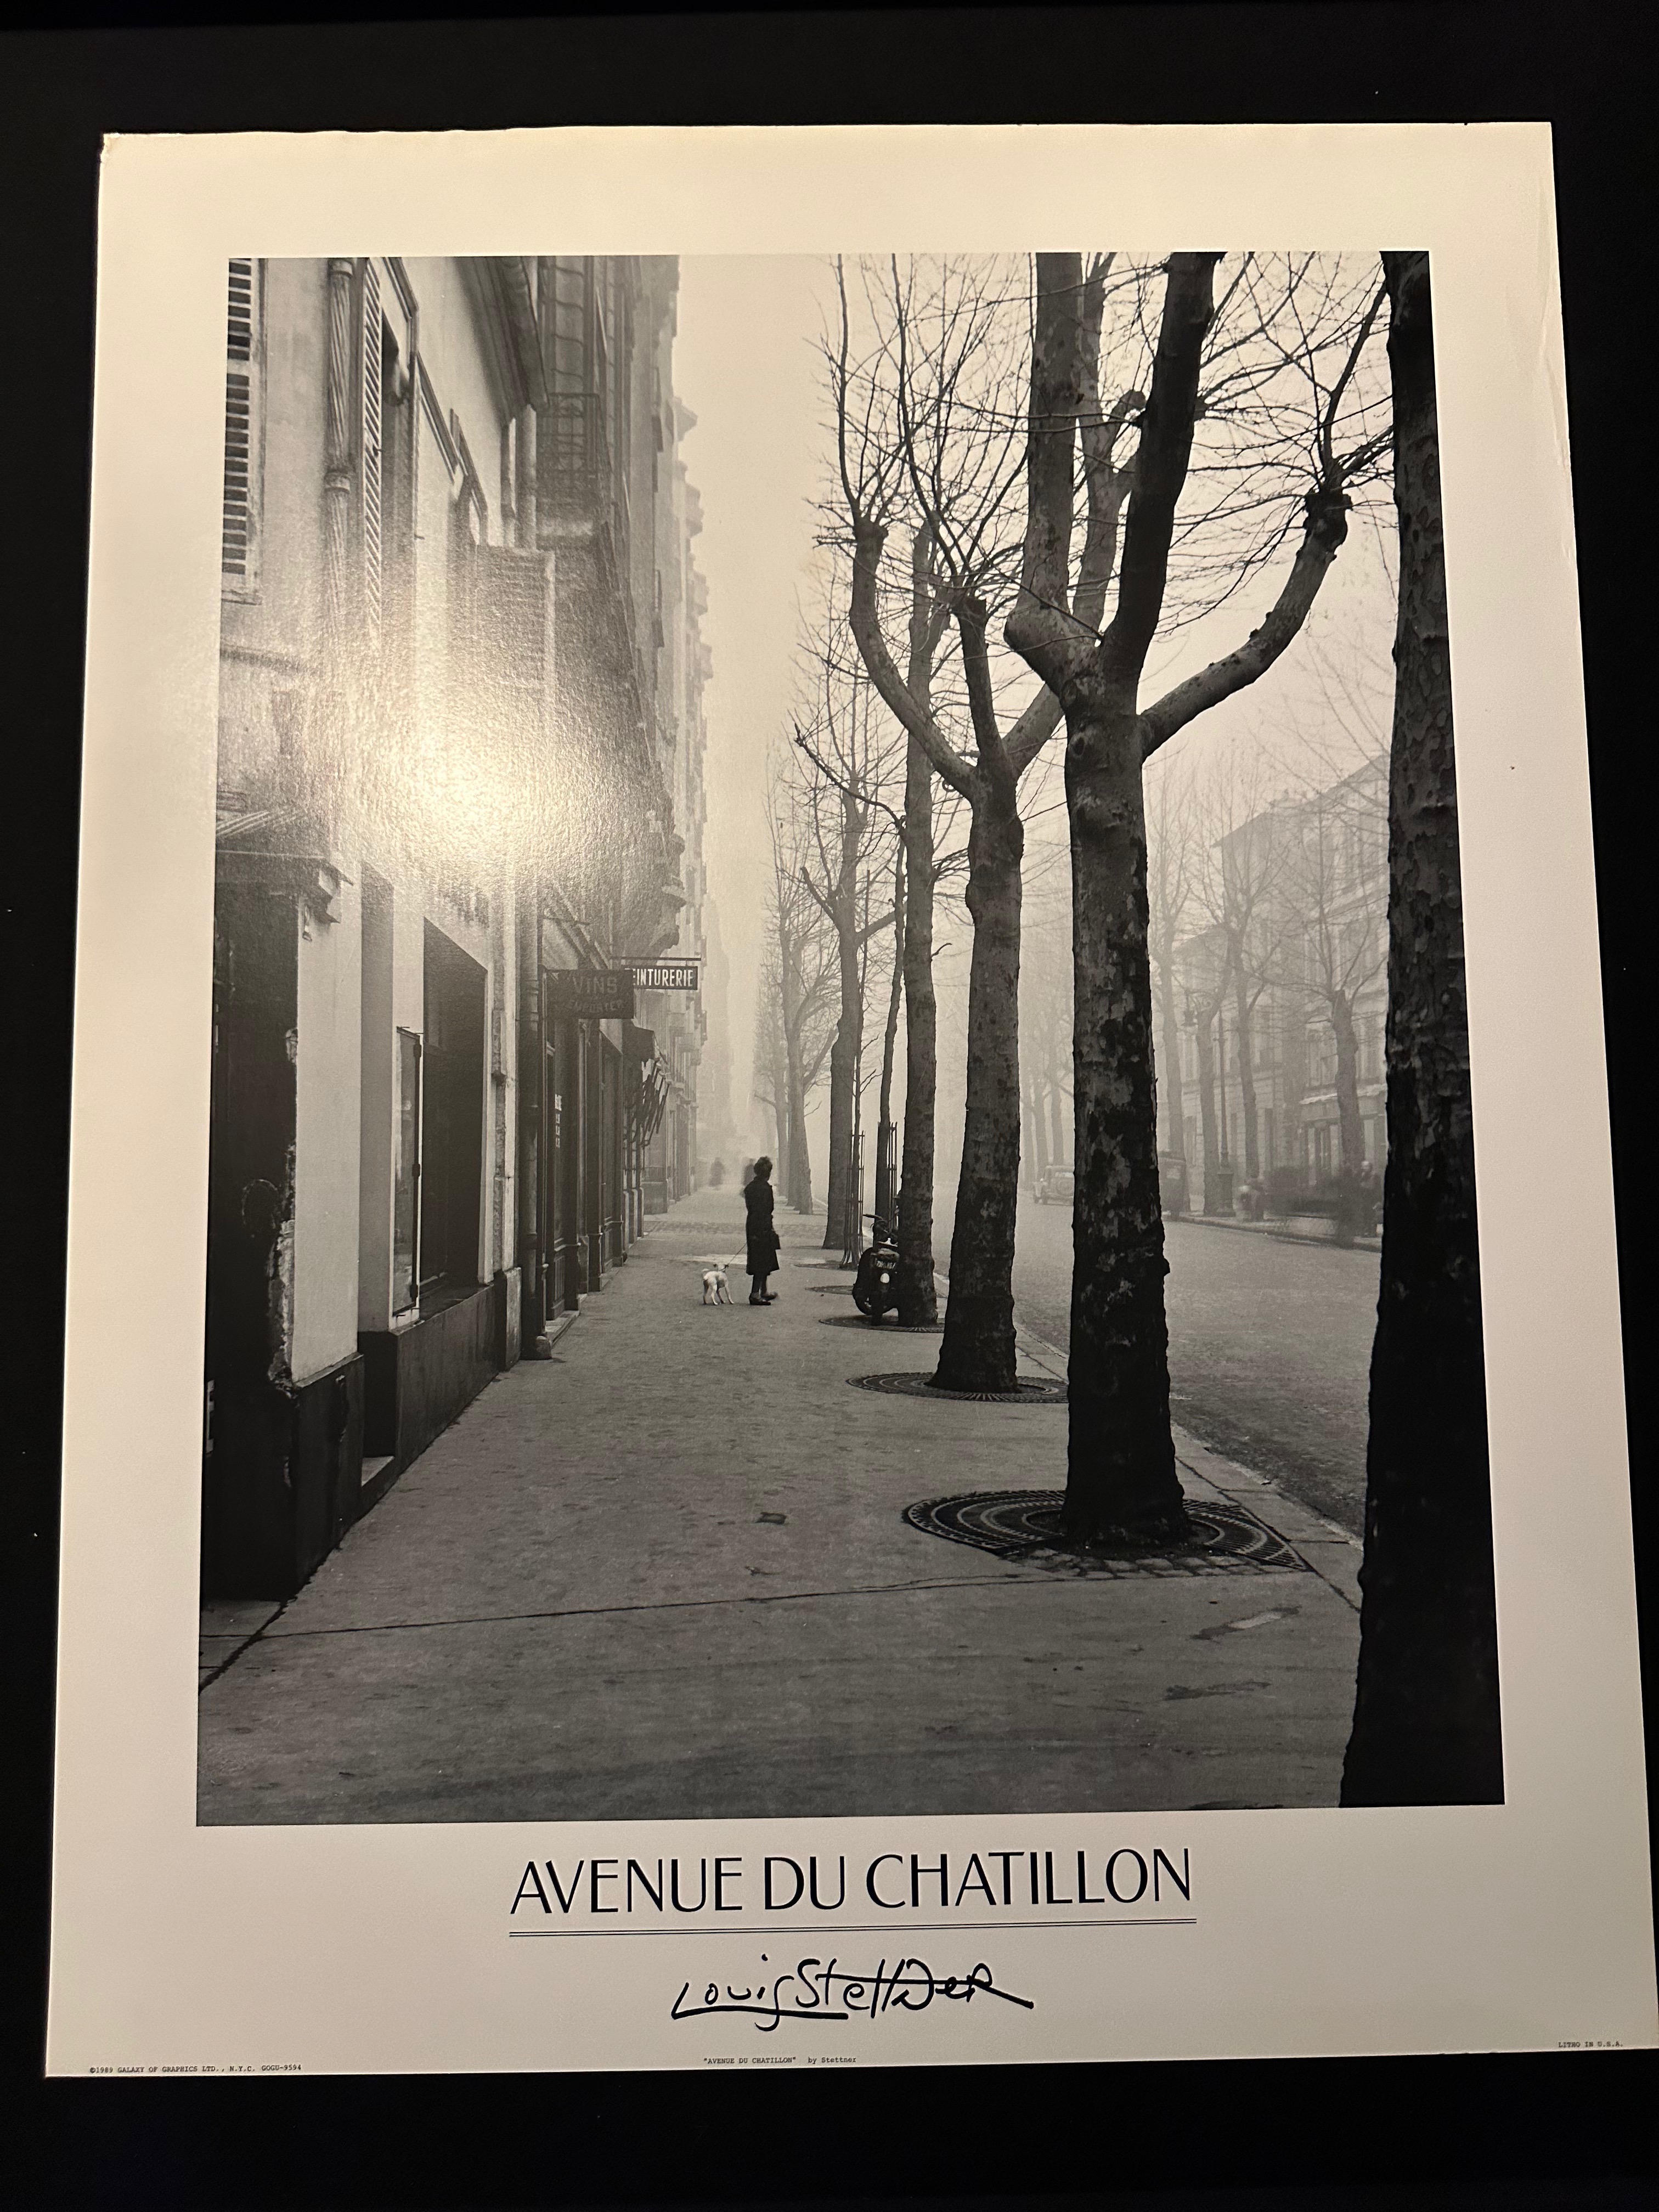 Four x Avenue Du Chatillon By Louis Stettner, 1989 Galaxy of Graphics Ltd, Litho U.S.A. - Image 9 of 16